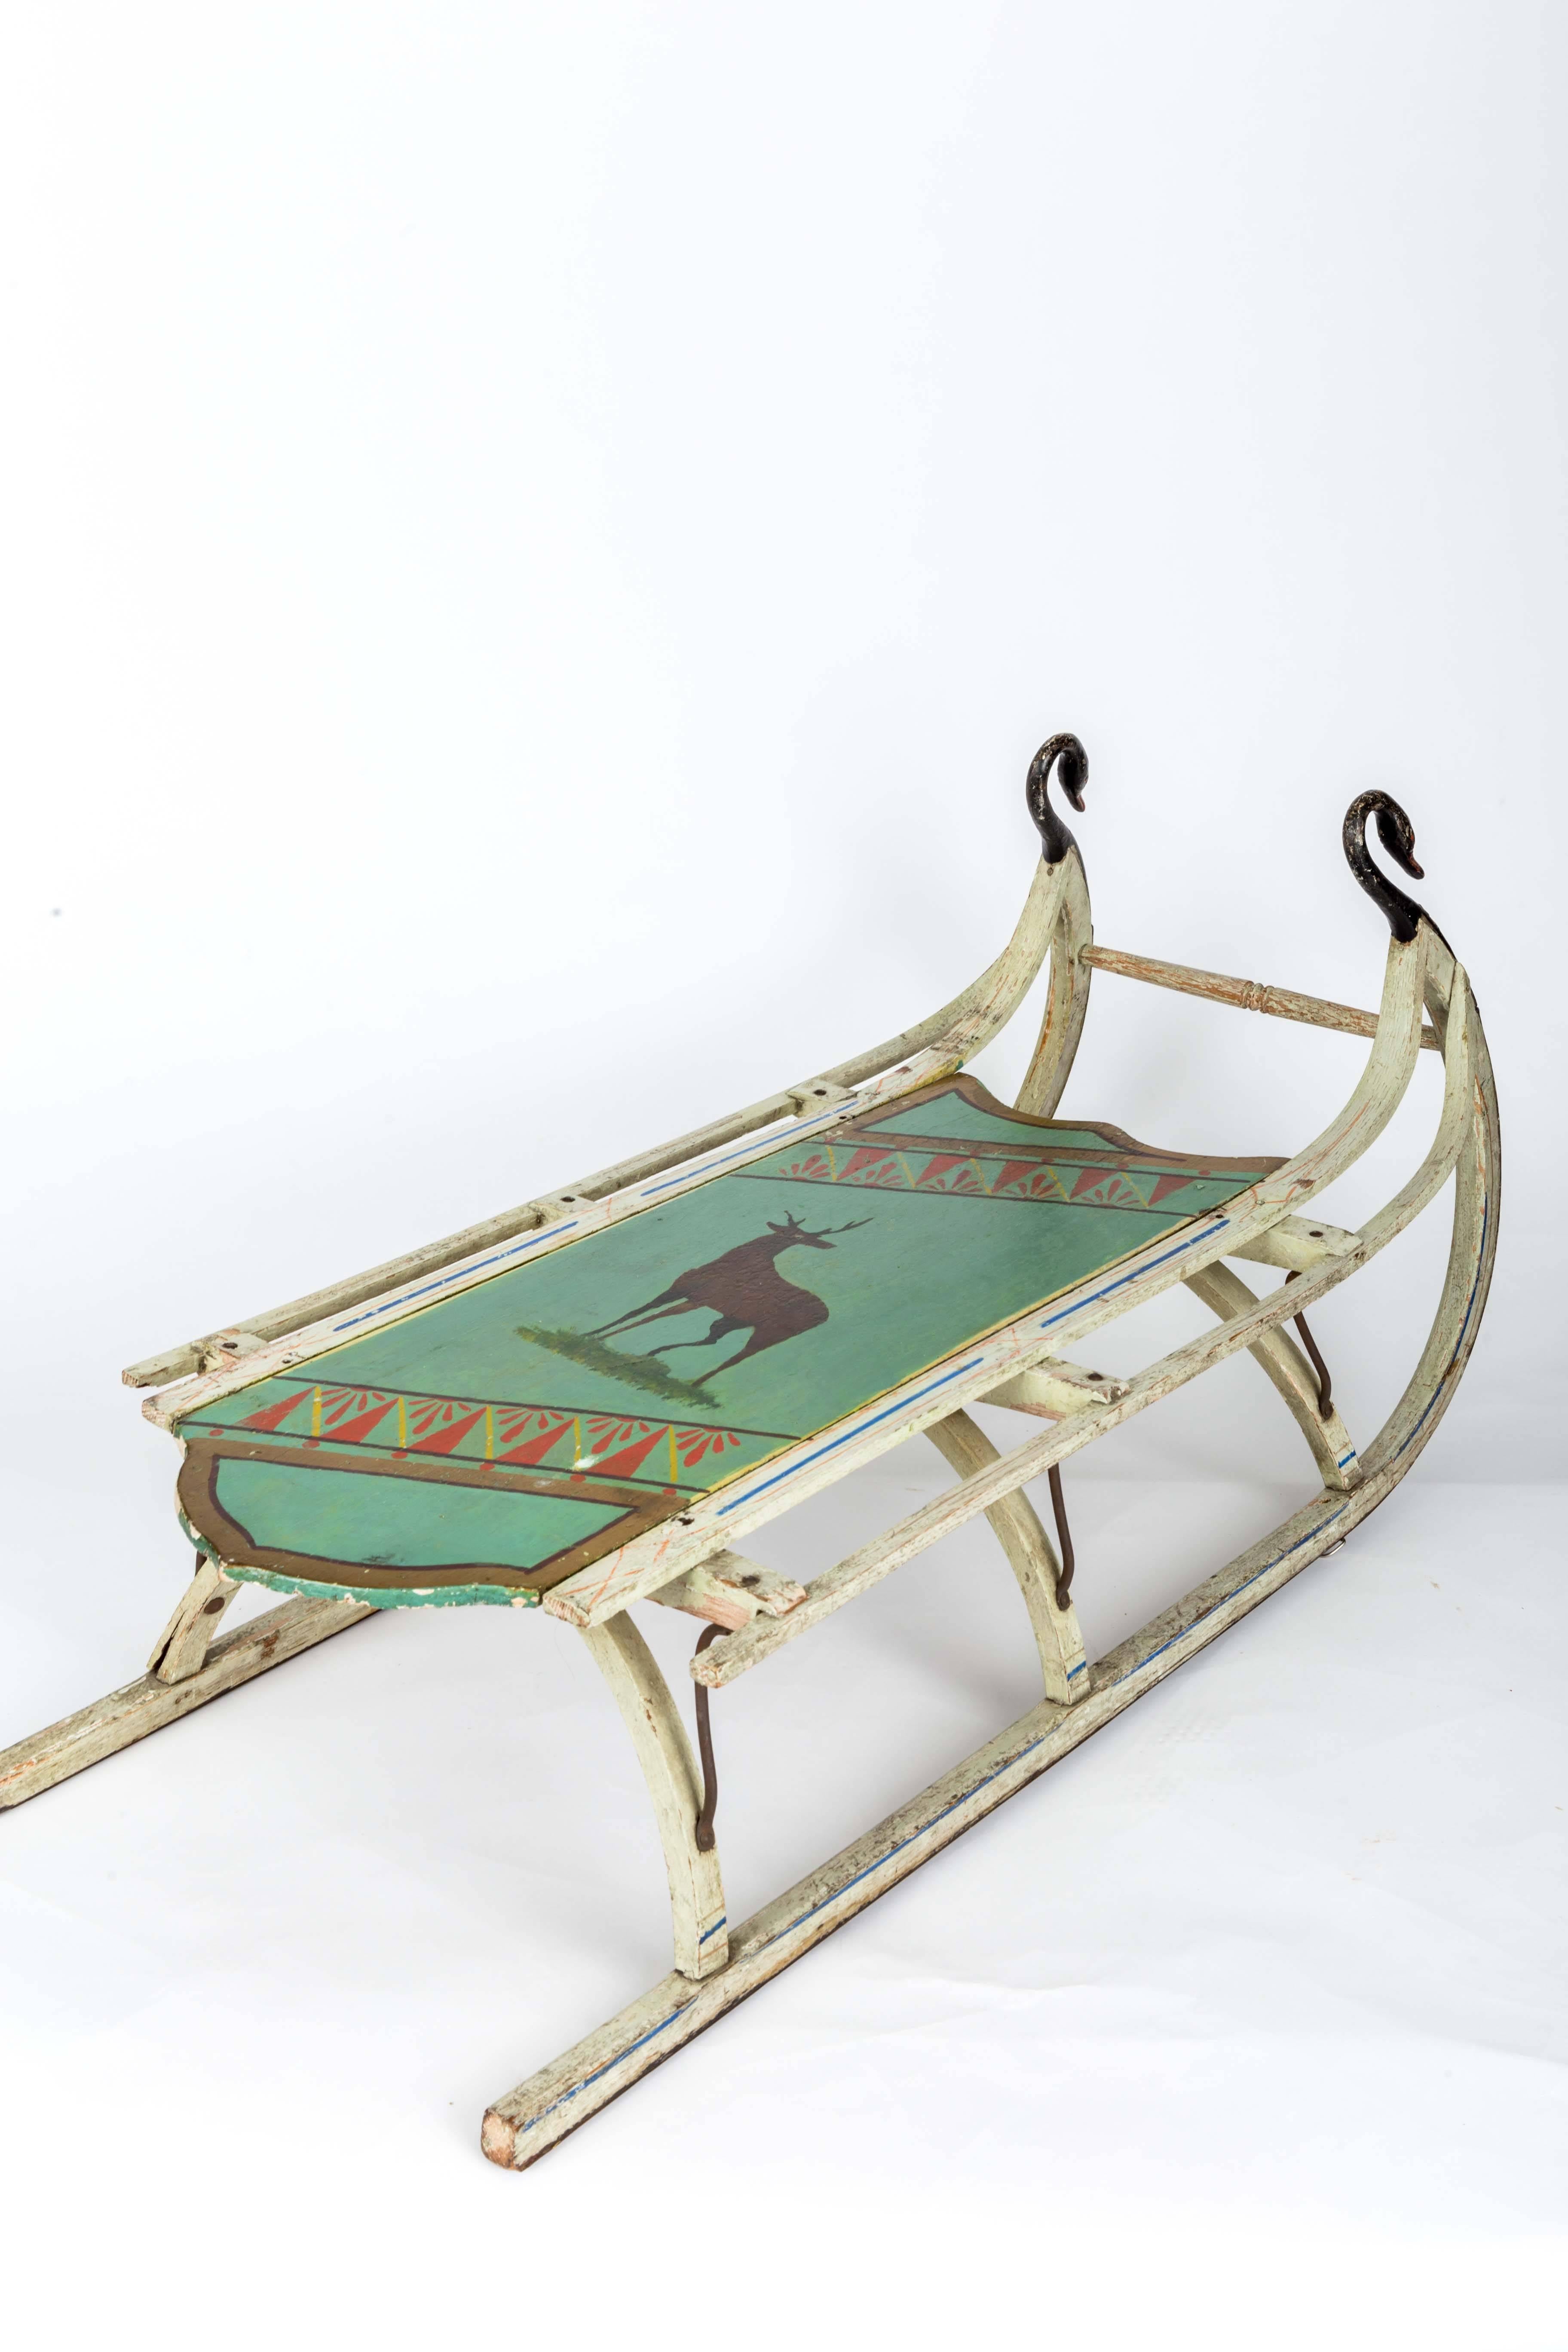 Folk Art 19th-Century Wooden Sled with Original Paint and Iron Swan Runners